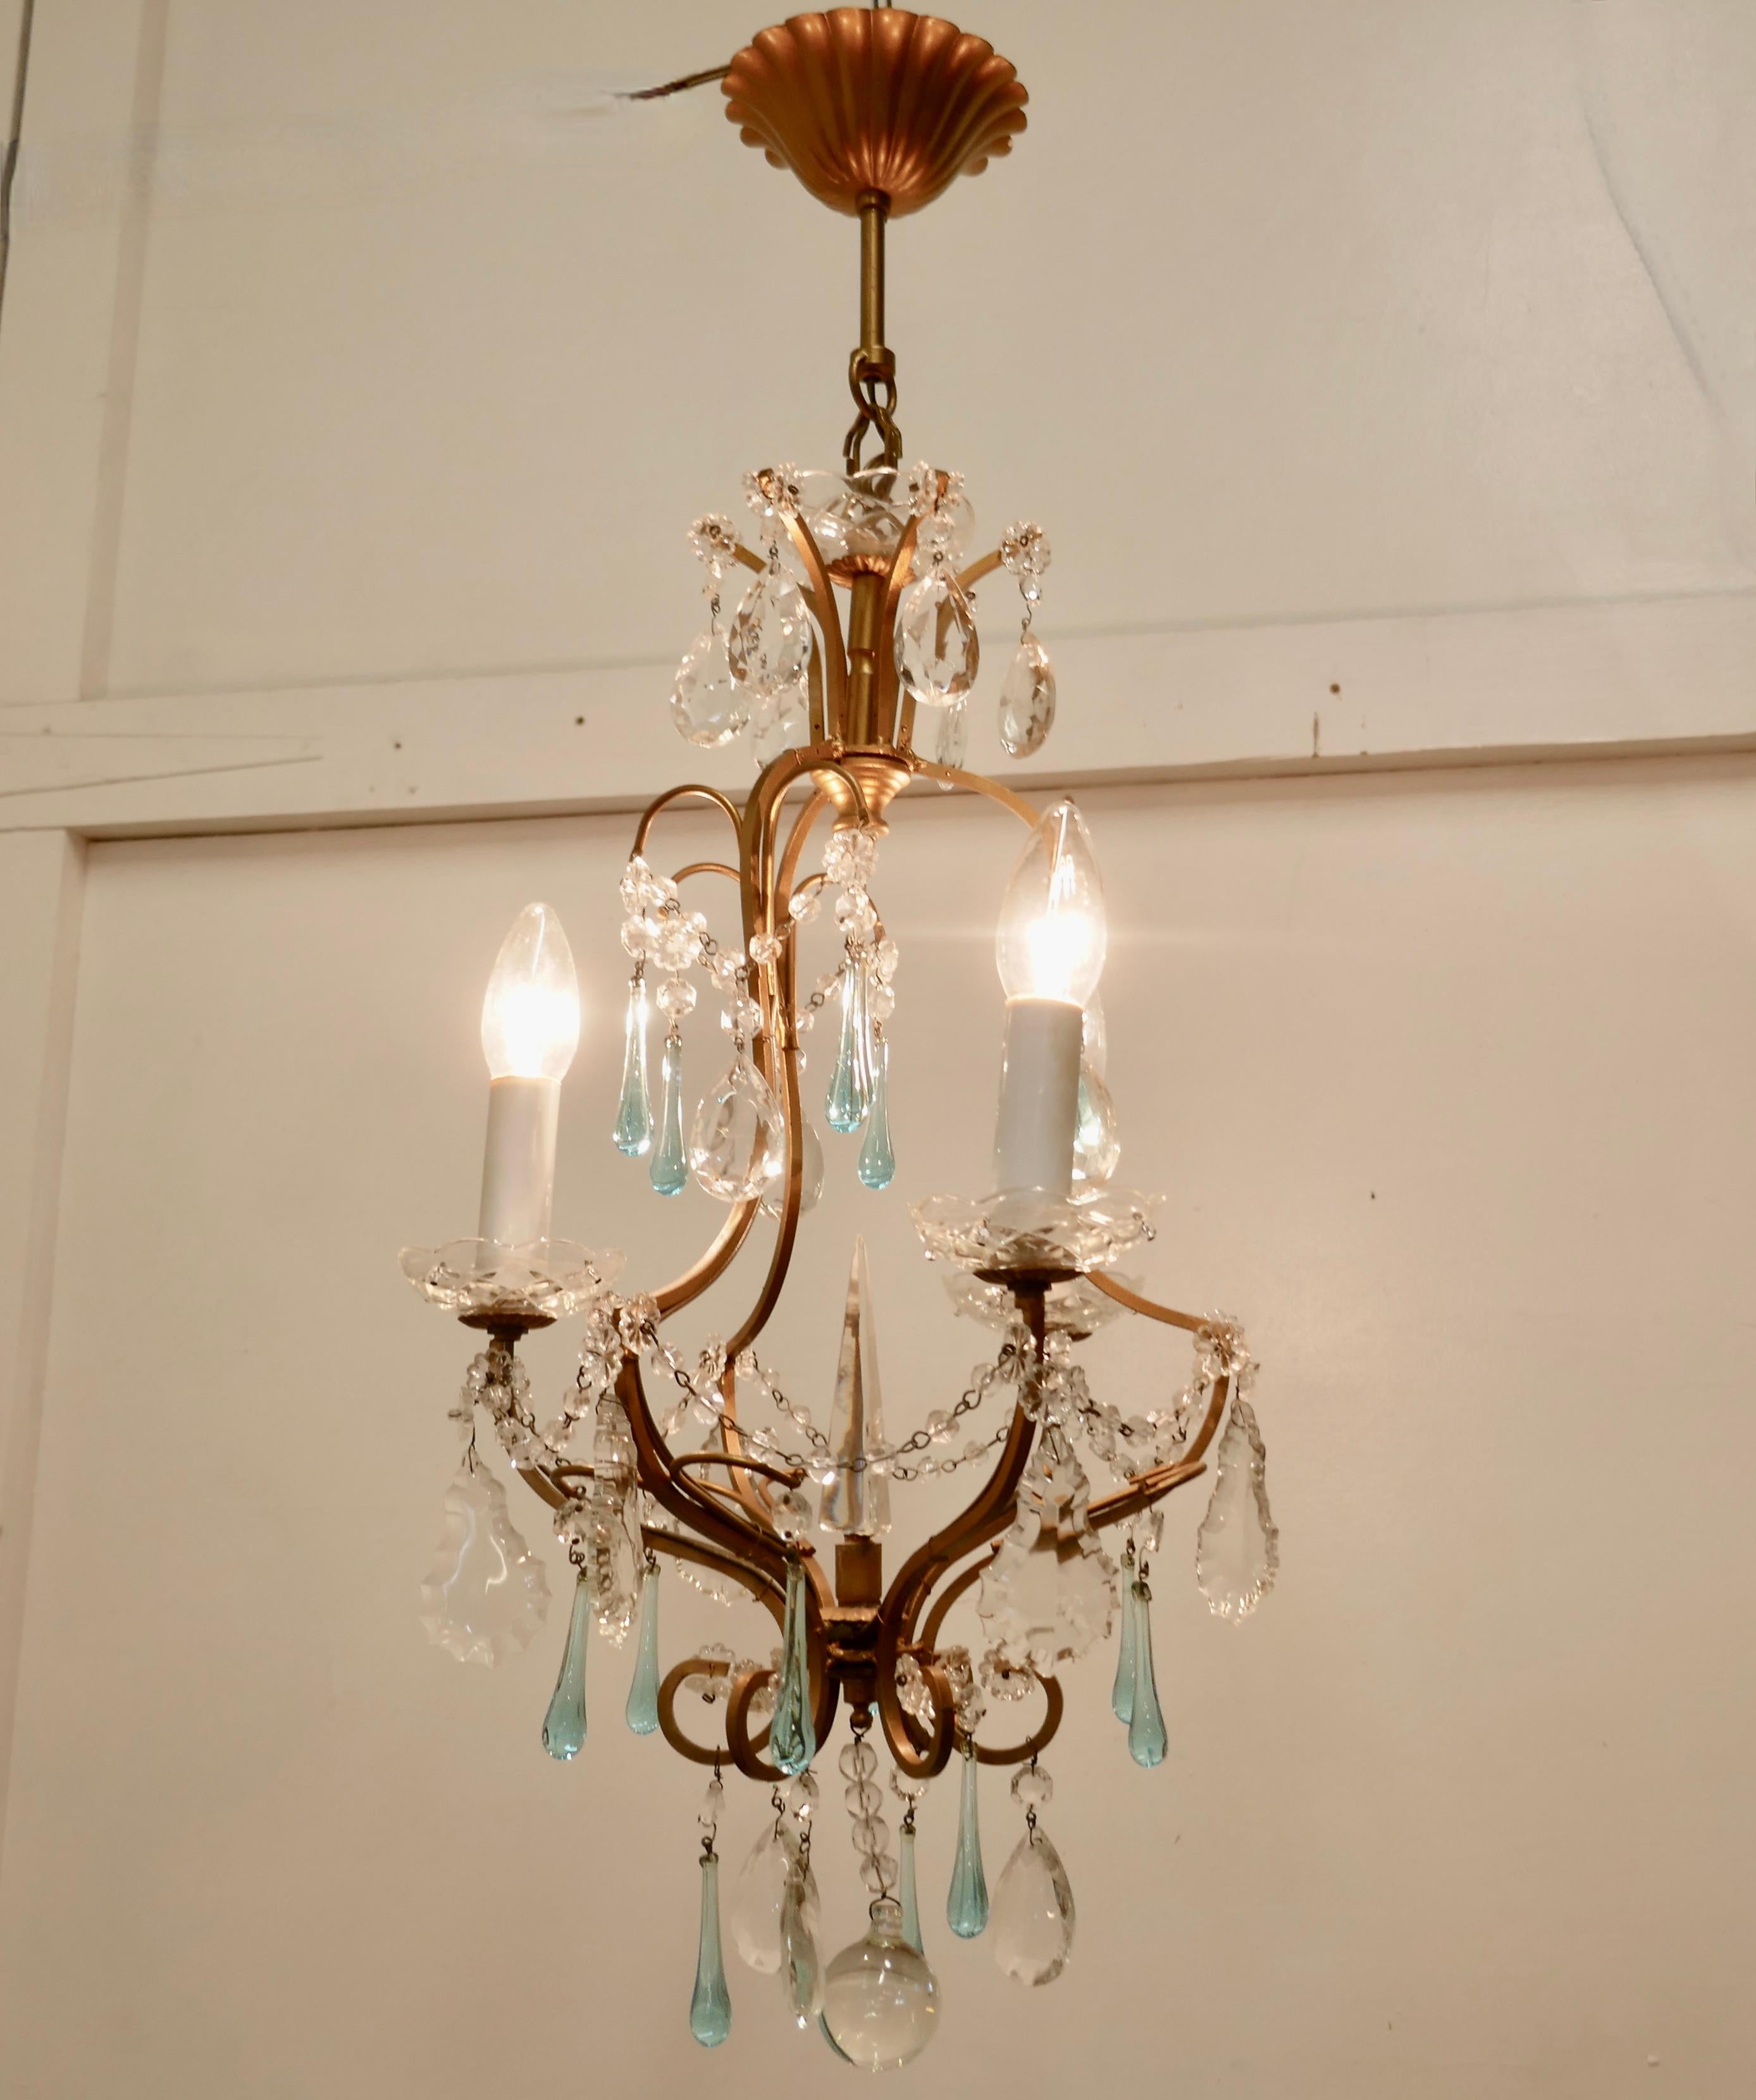 Early 20th Century French Crystal Chandelier with Chains and Turquoise Drops    For Sale